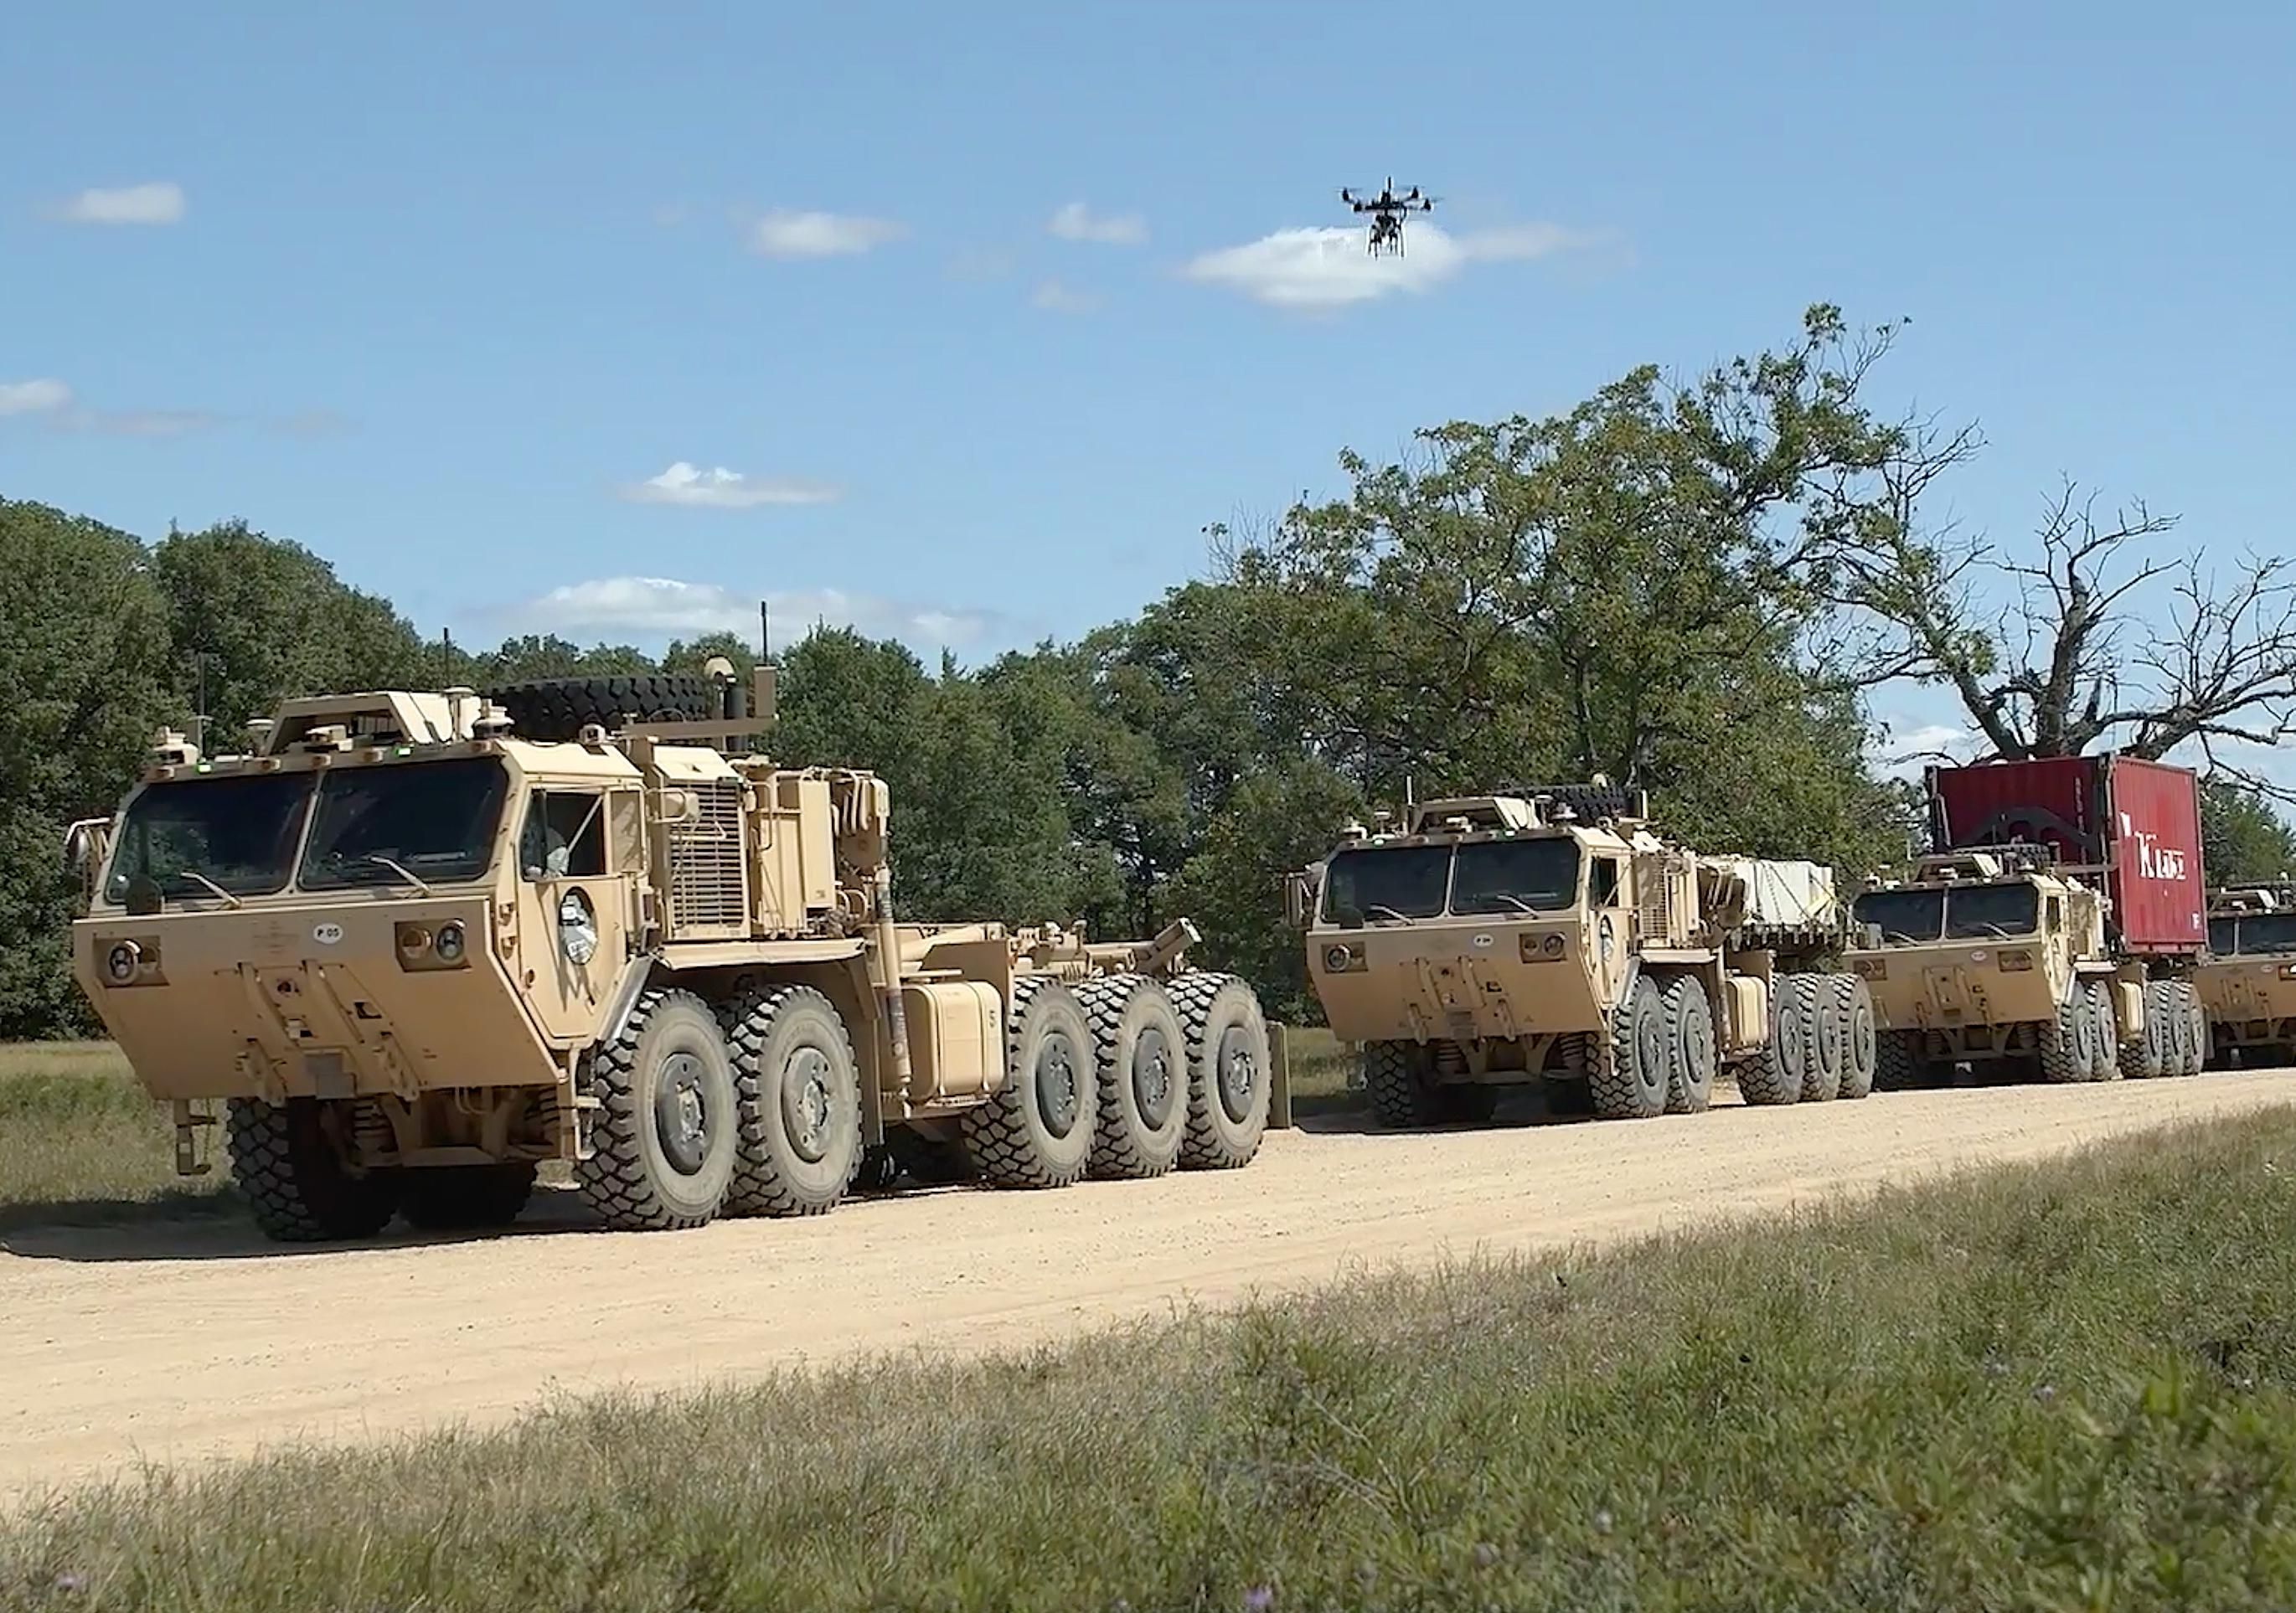 4 large military vehicles on a dirt road. The third carries a red container box. Hovering above them in a blue sky is a large drone.